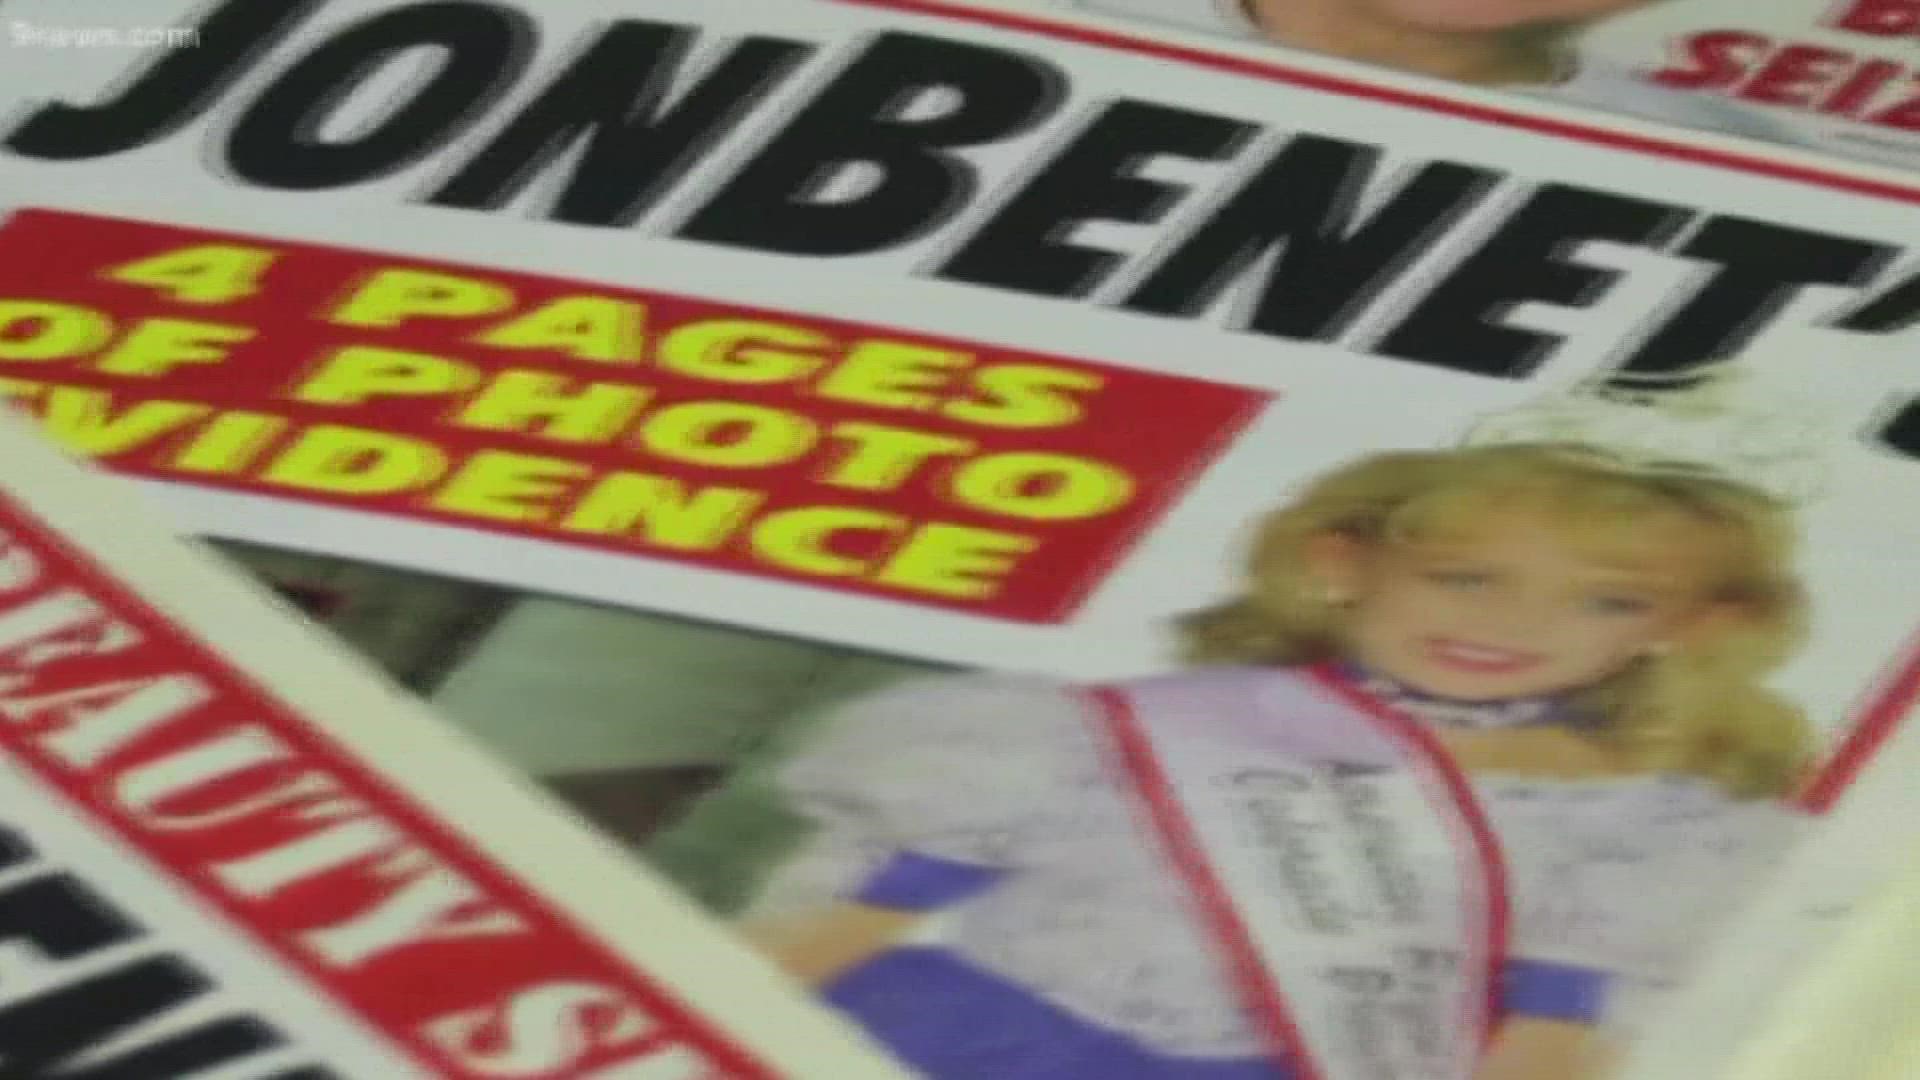 The family of JonBenet Ramsey is petitioning Gov. Jared Polis to take new action to help find answers in the case that's gone unsolved for more than 25 years.